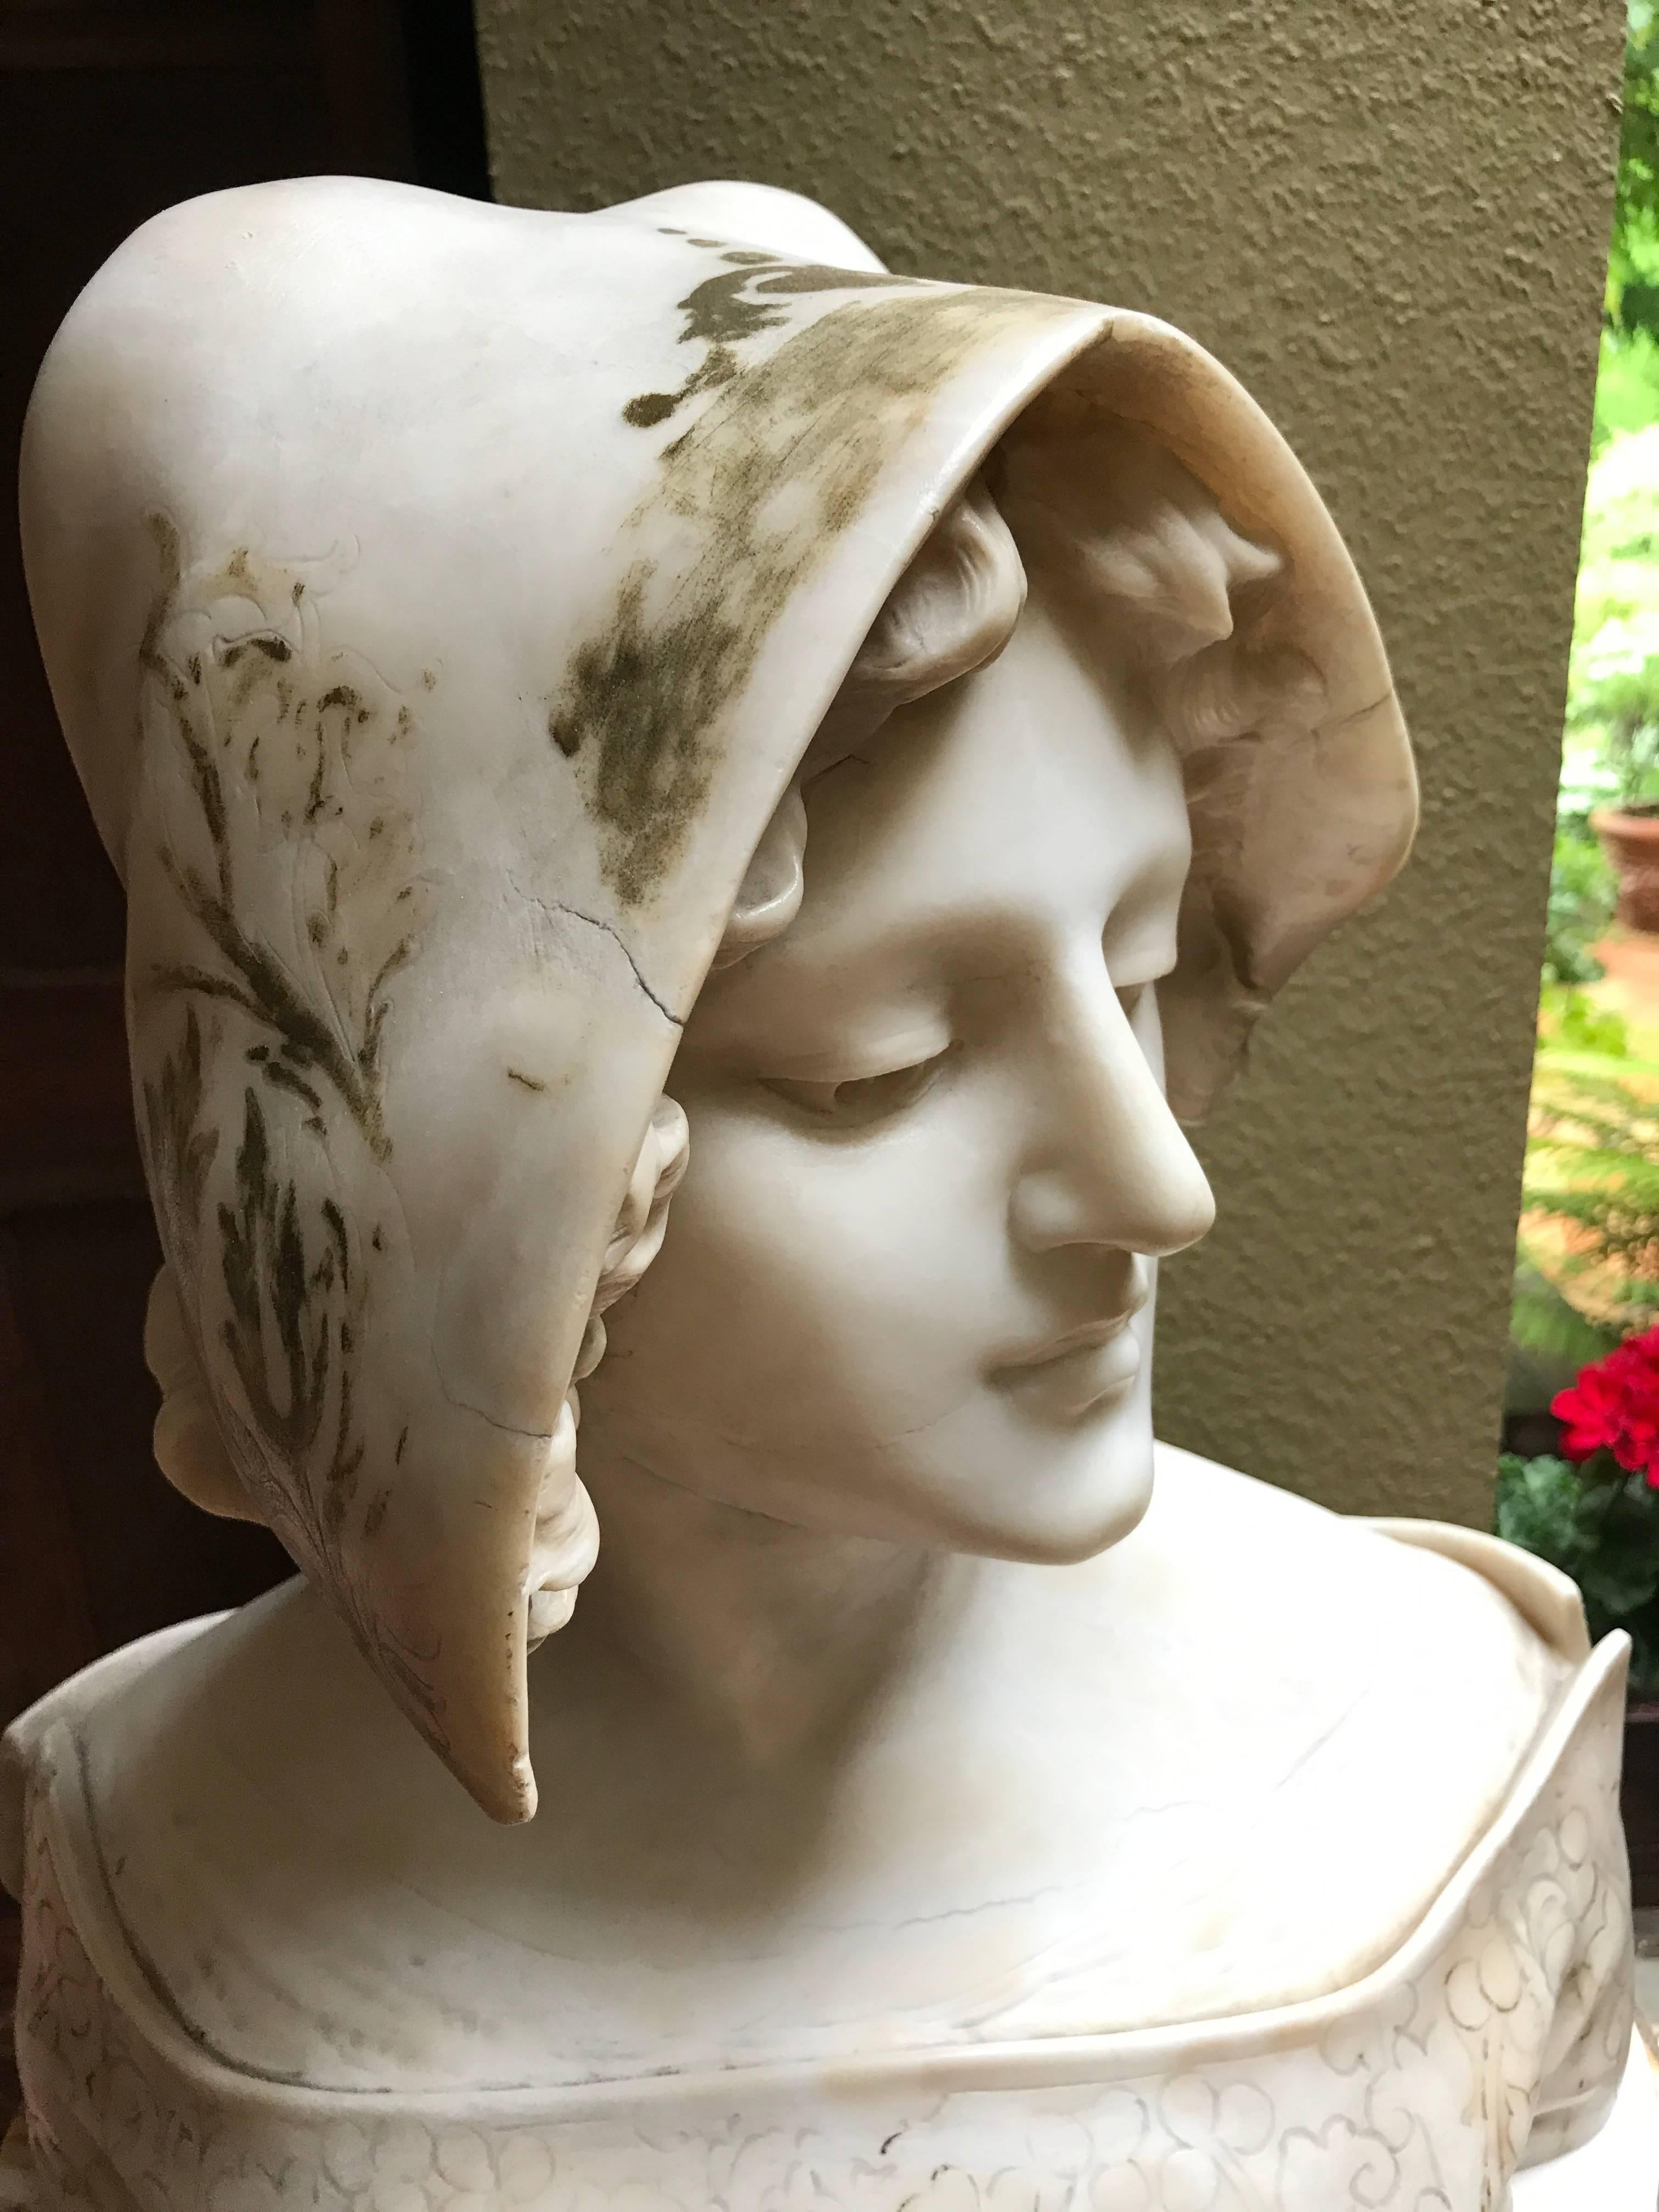 Woman Bust by Vicari Cristoforo (Italy 1846-1913)

Italian artist famous for his woman busts 
White (Carrara) marble with rests of painted lace on the head and shoulders
Signed on the back
Two parts: The bust and the foot fabricated in in other